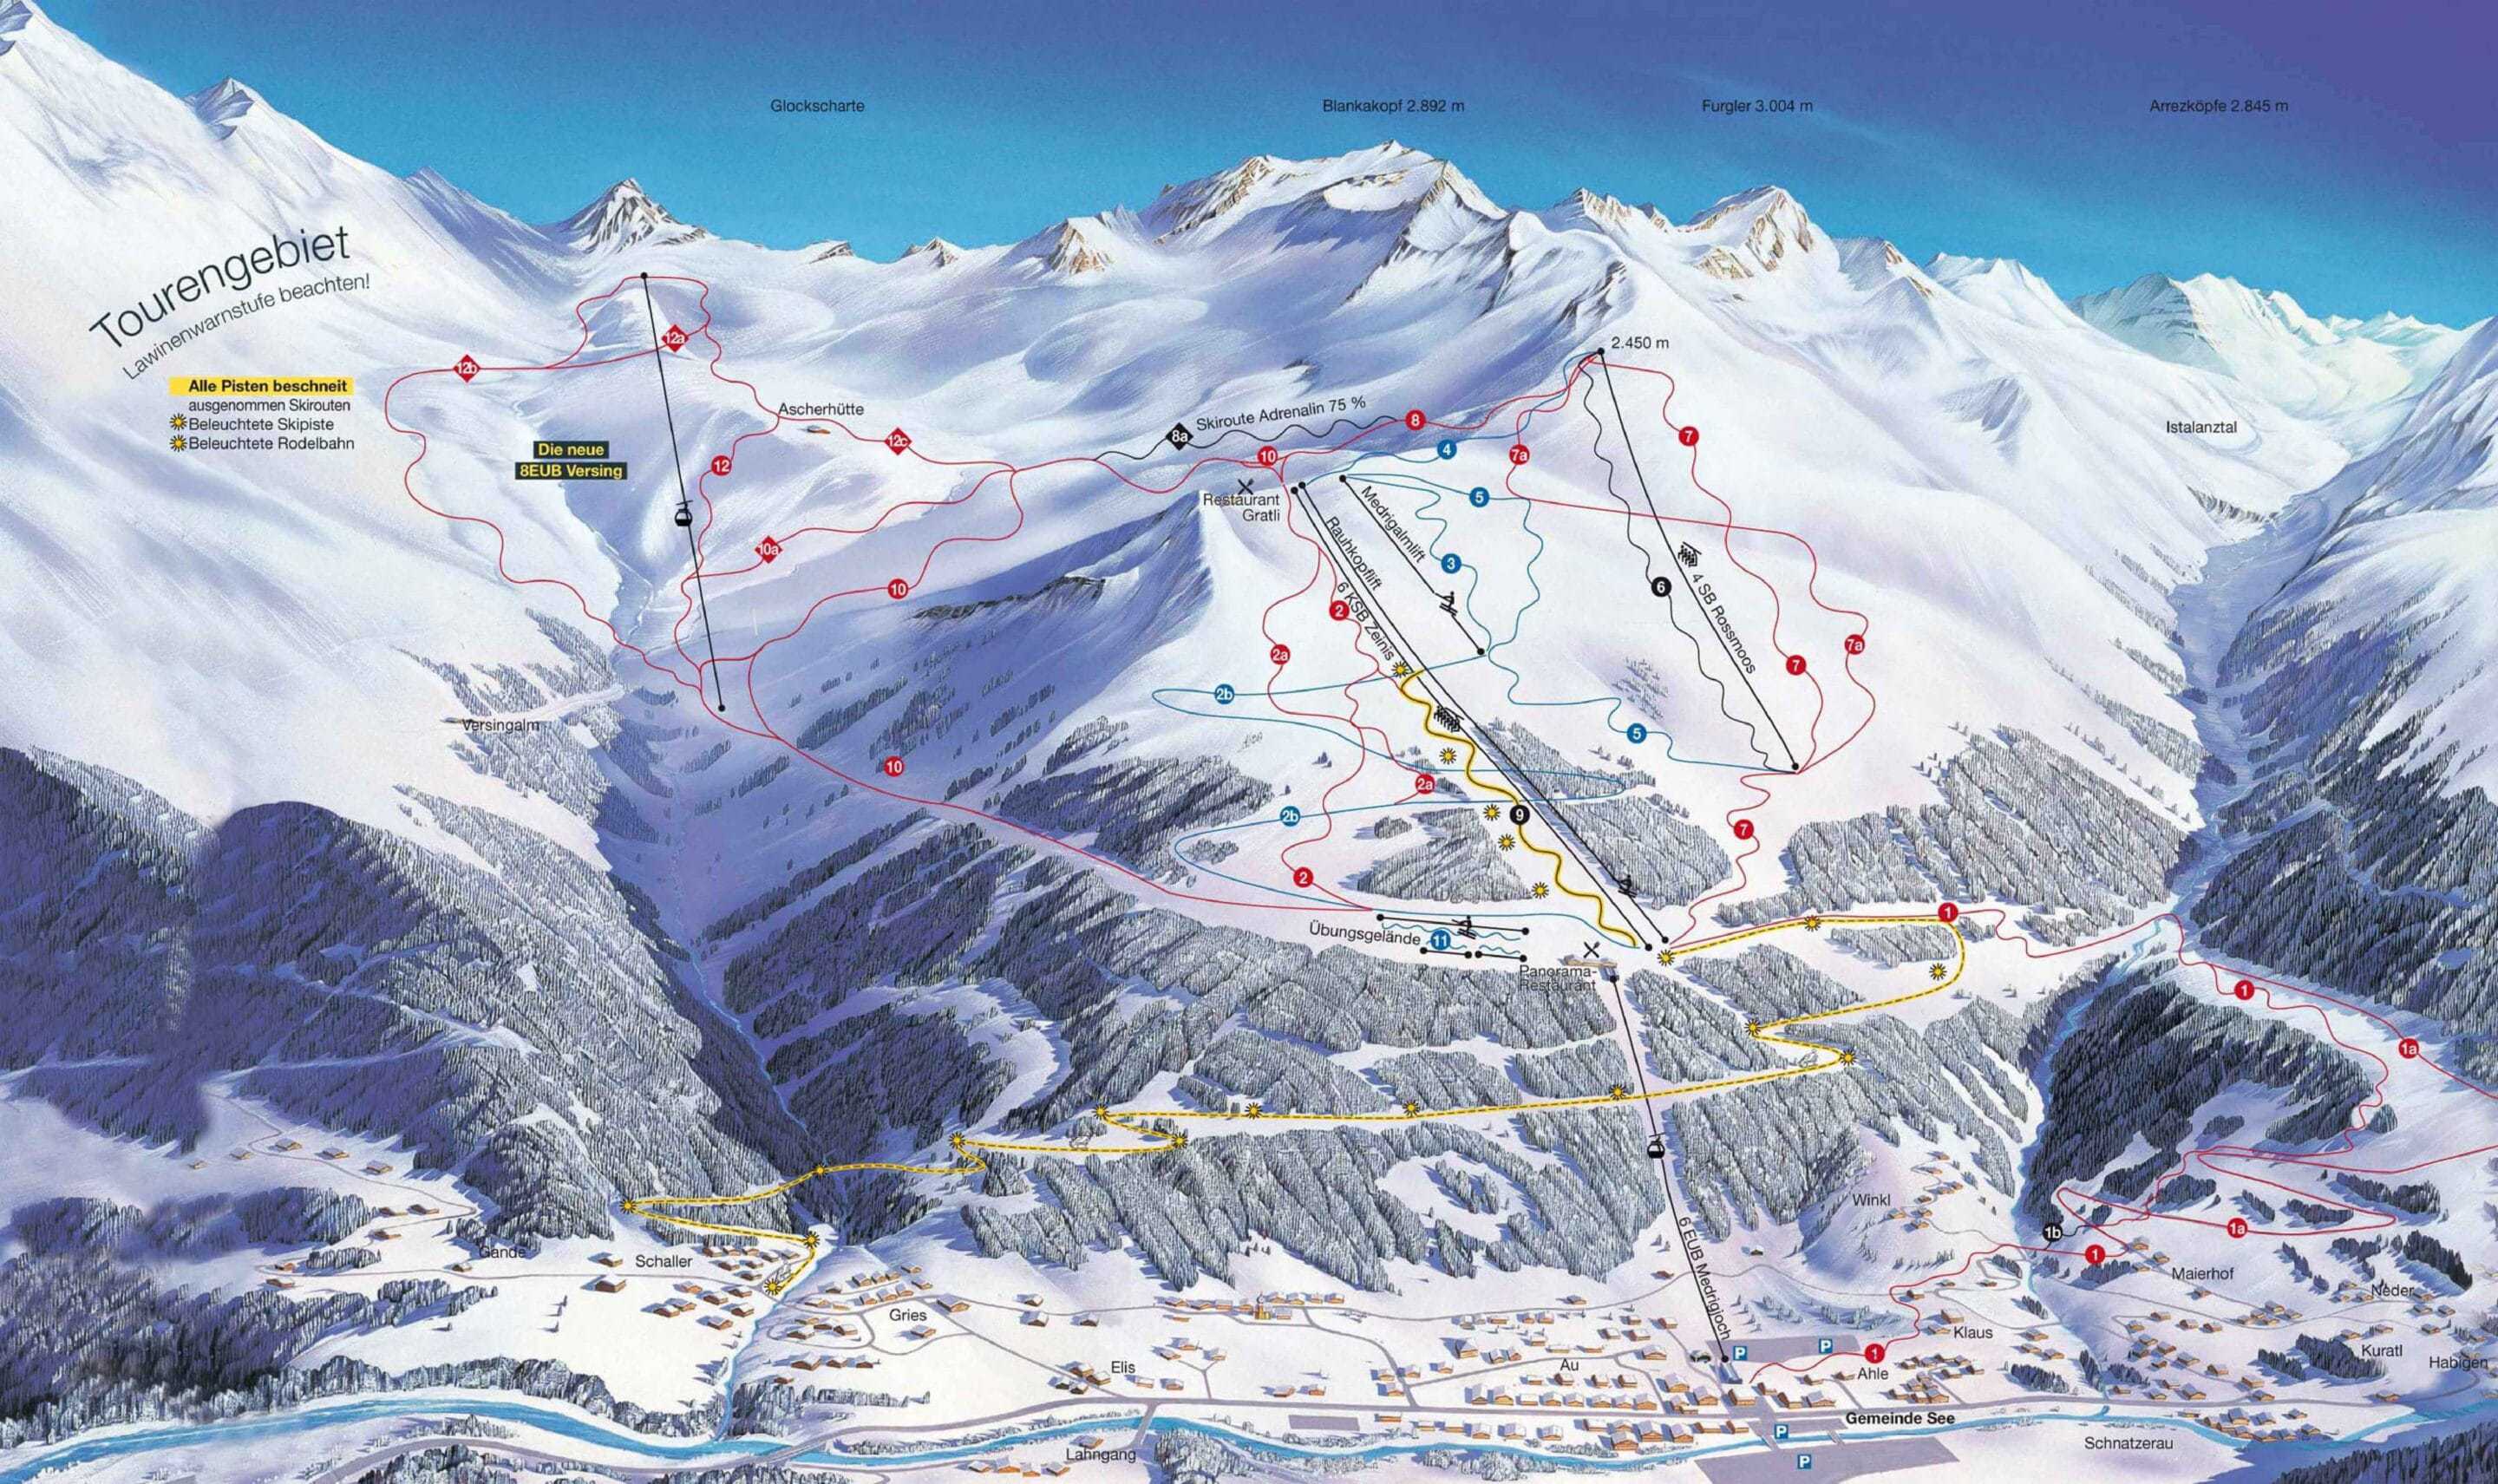 strig See Piste Map 2017 1 1 scaled